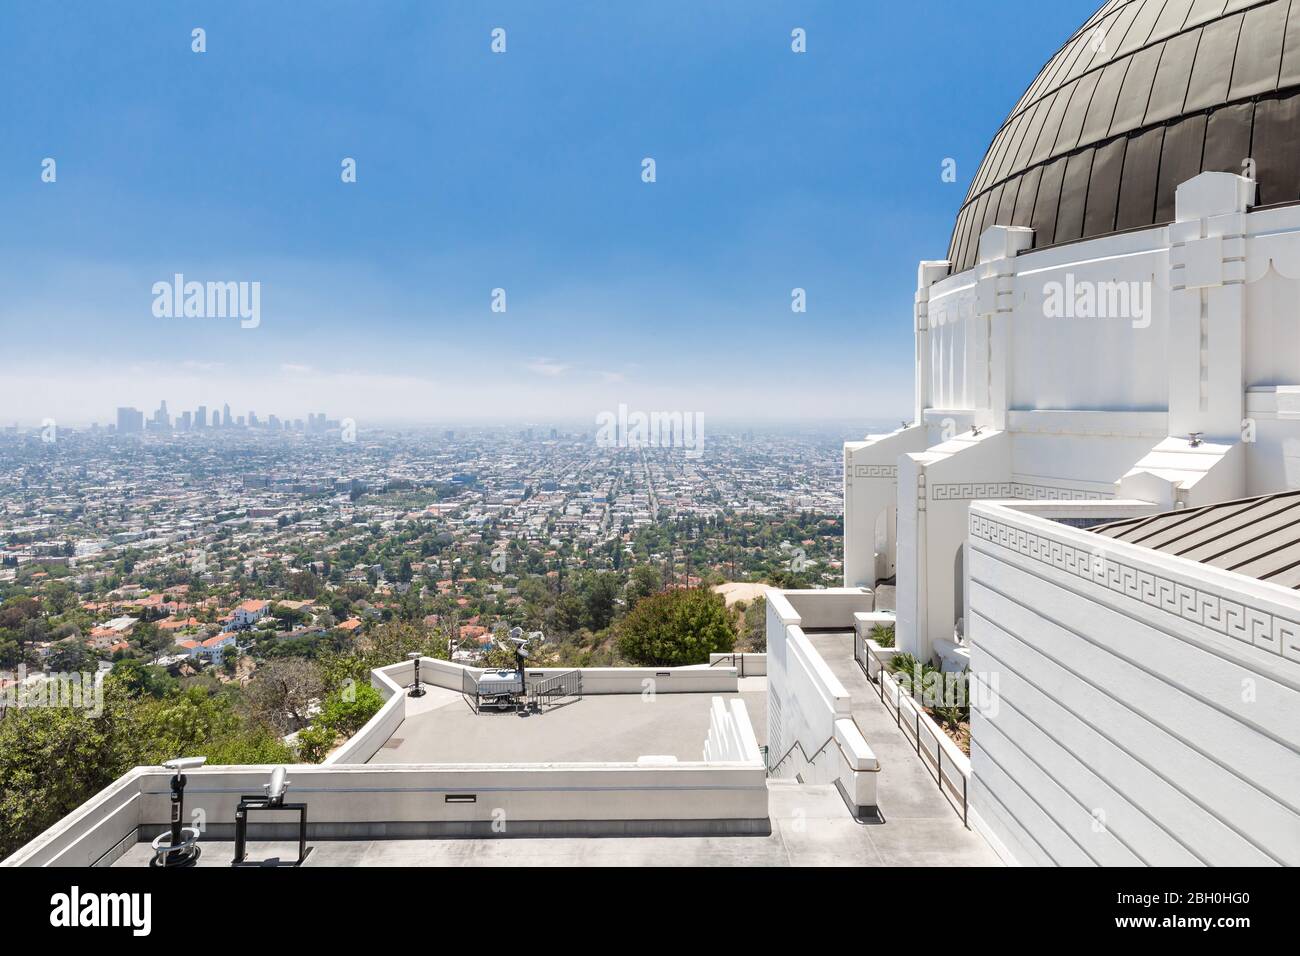 Wide angle view of the Griffith Observatory overlooking the city of Los Angeles, under a blue summer sky Stock Photo